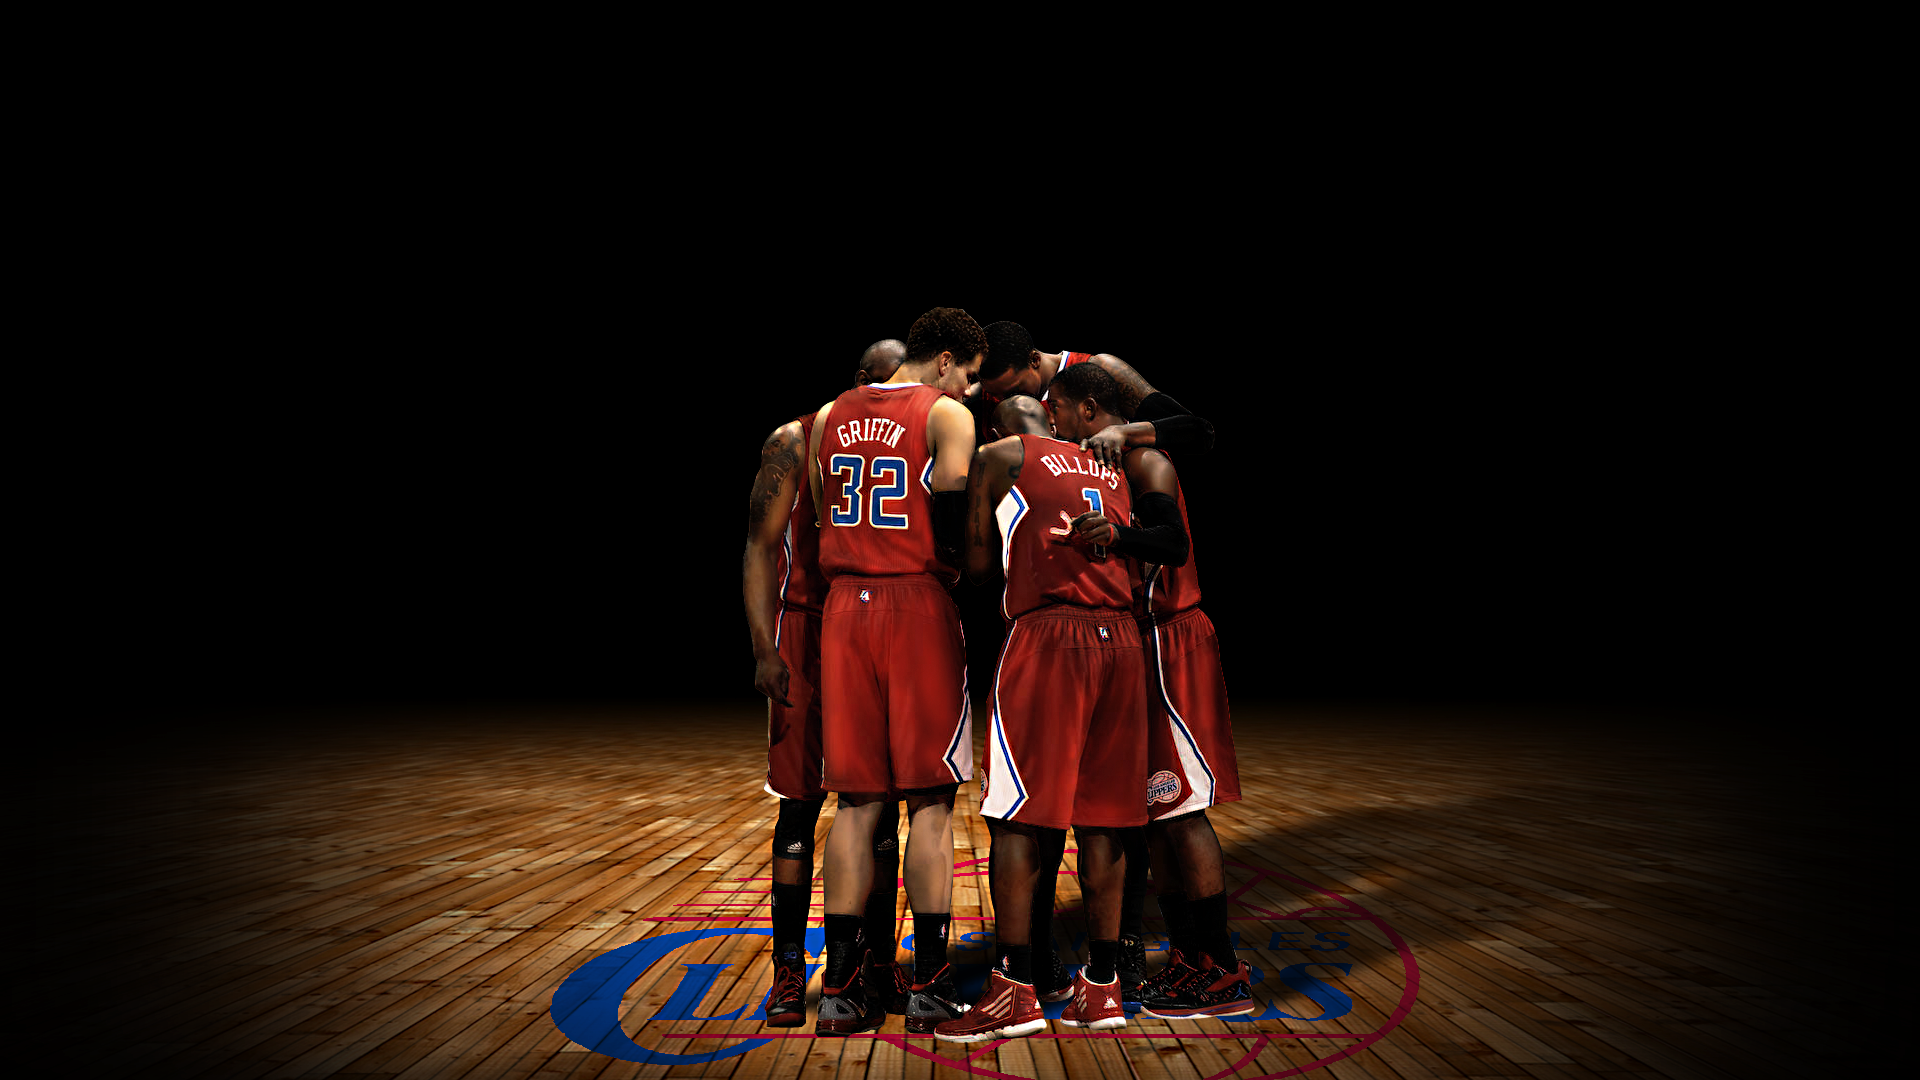 LOS ANGELES CLIPPERS basketball nba 2 wallpaper background